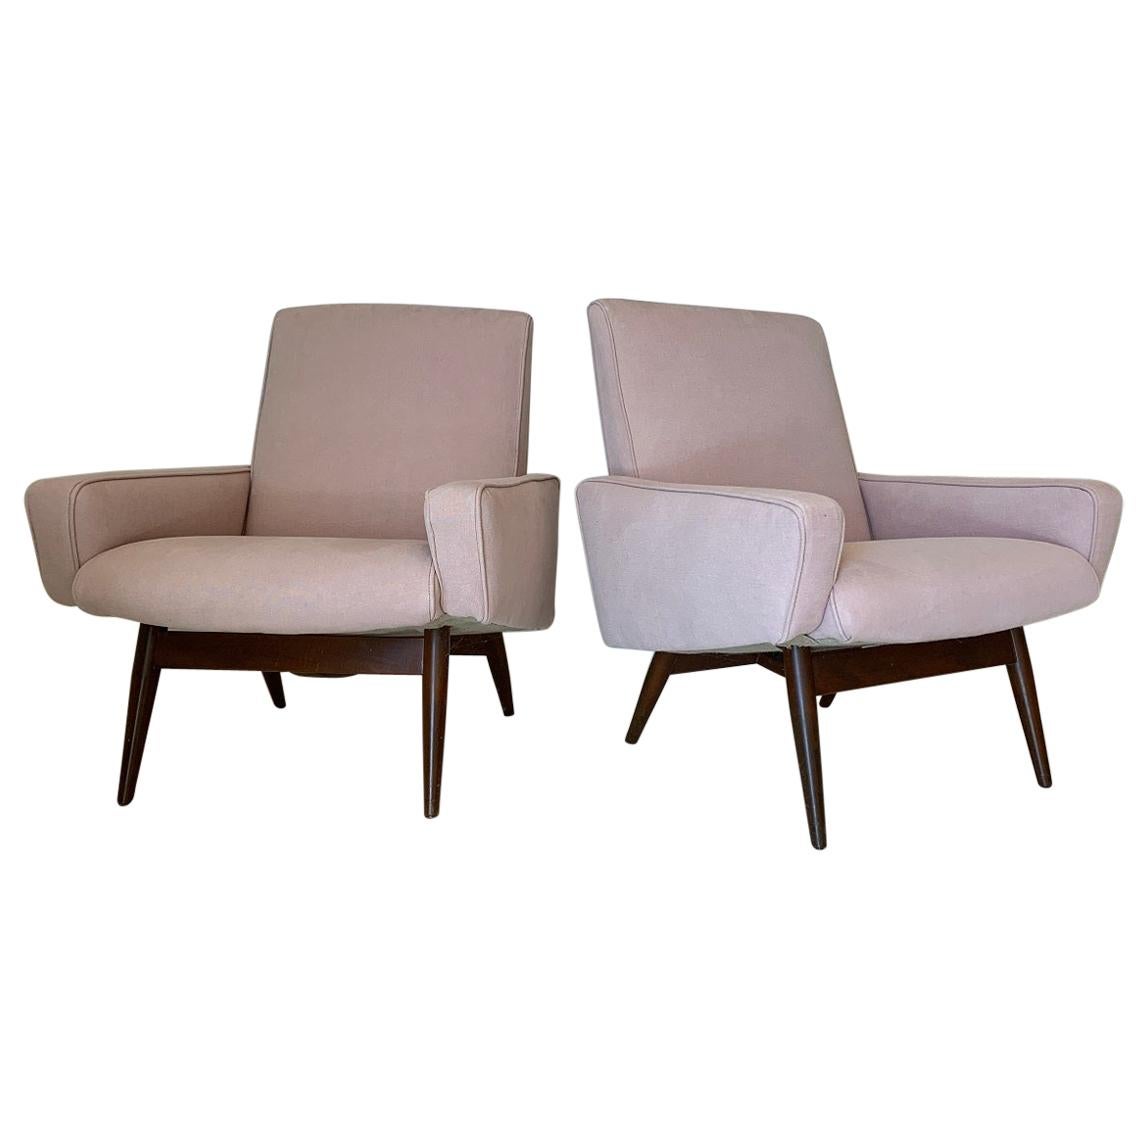 Pair of Midcentury Pink Lounge Chairs